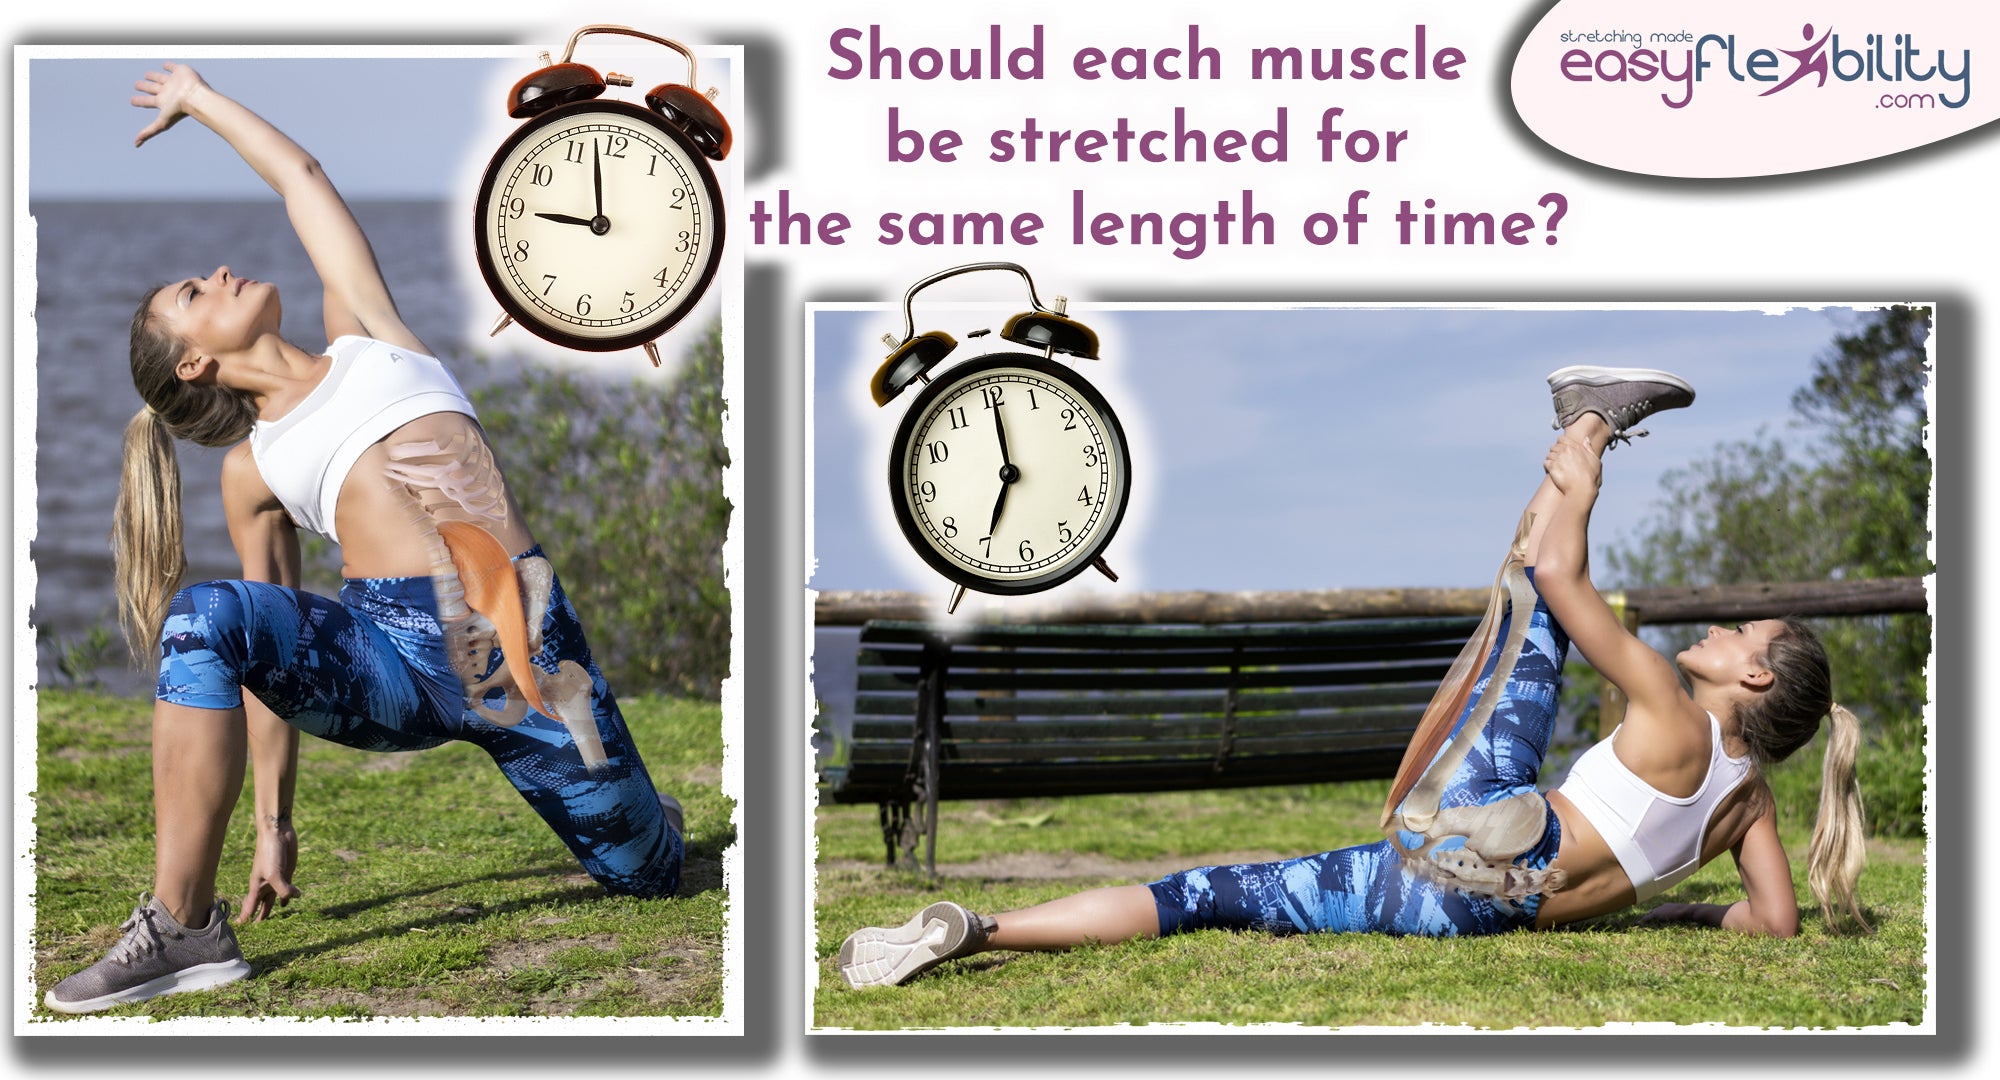 Should each muscle be stretched for the same length of time?